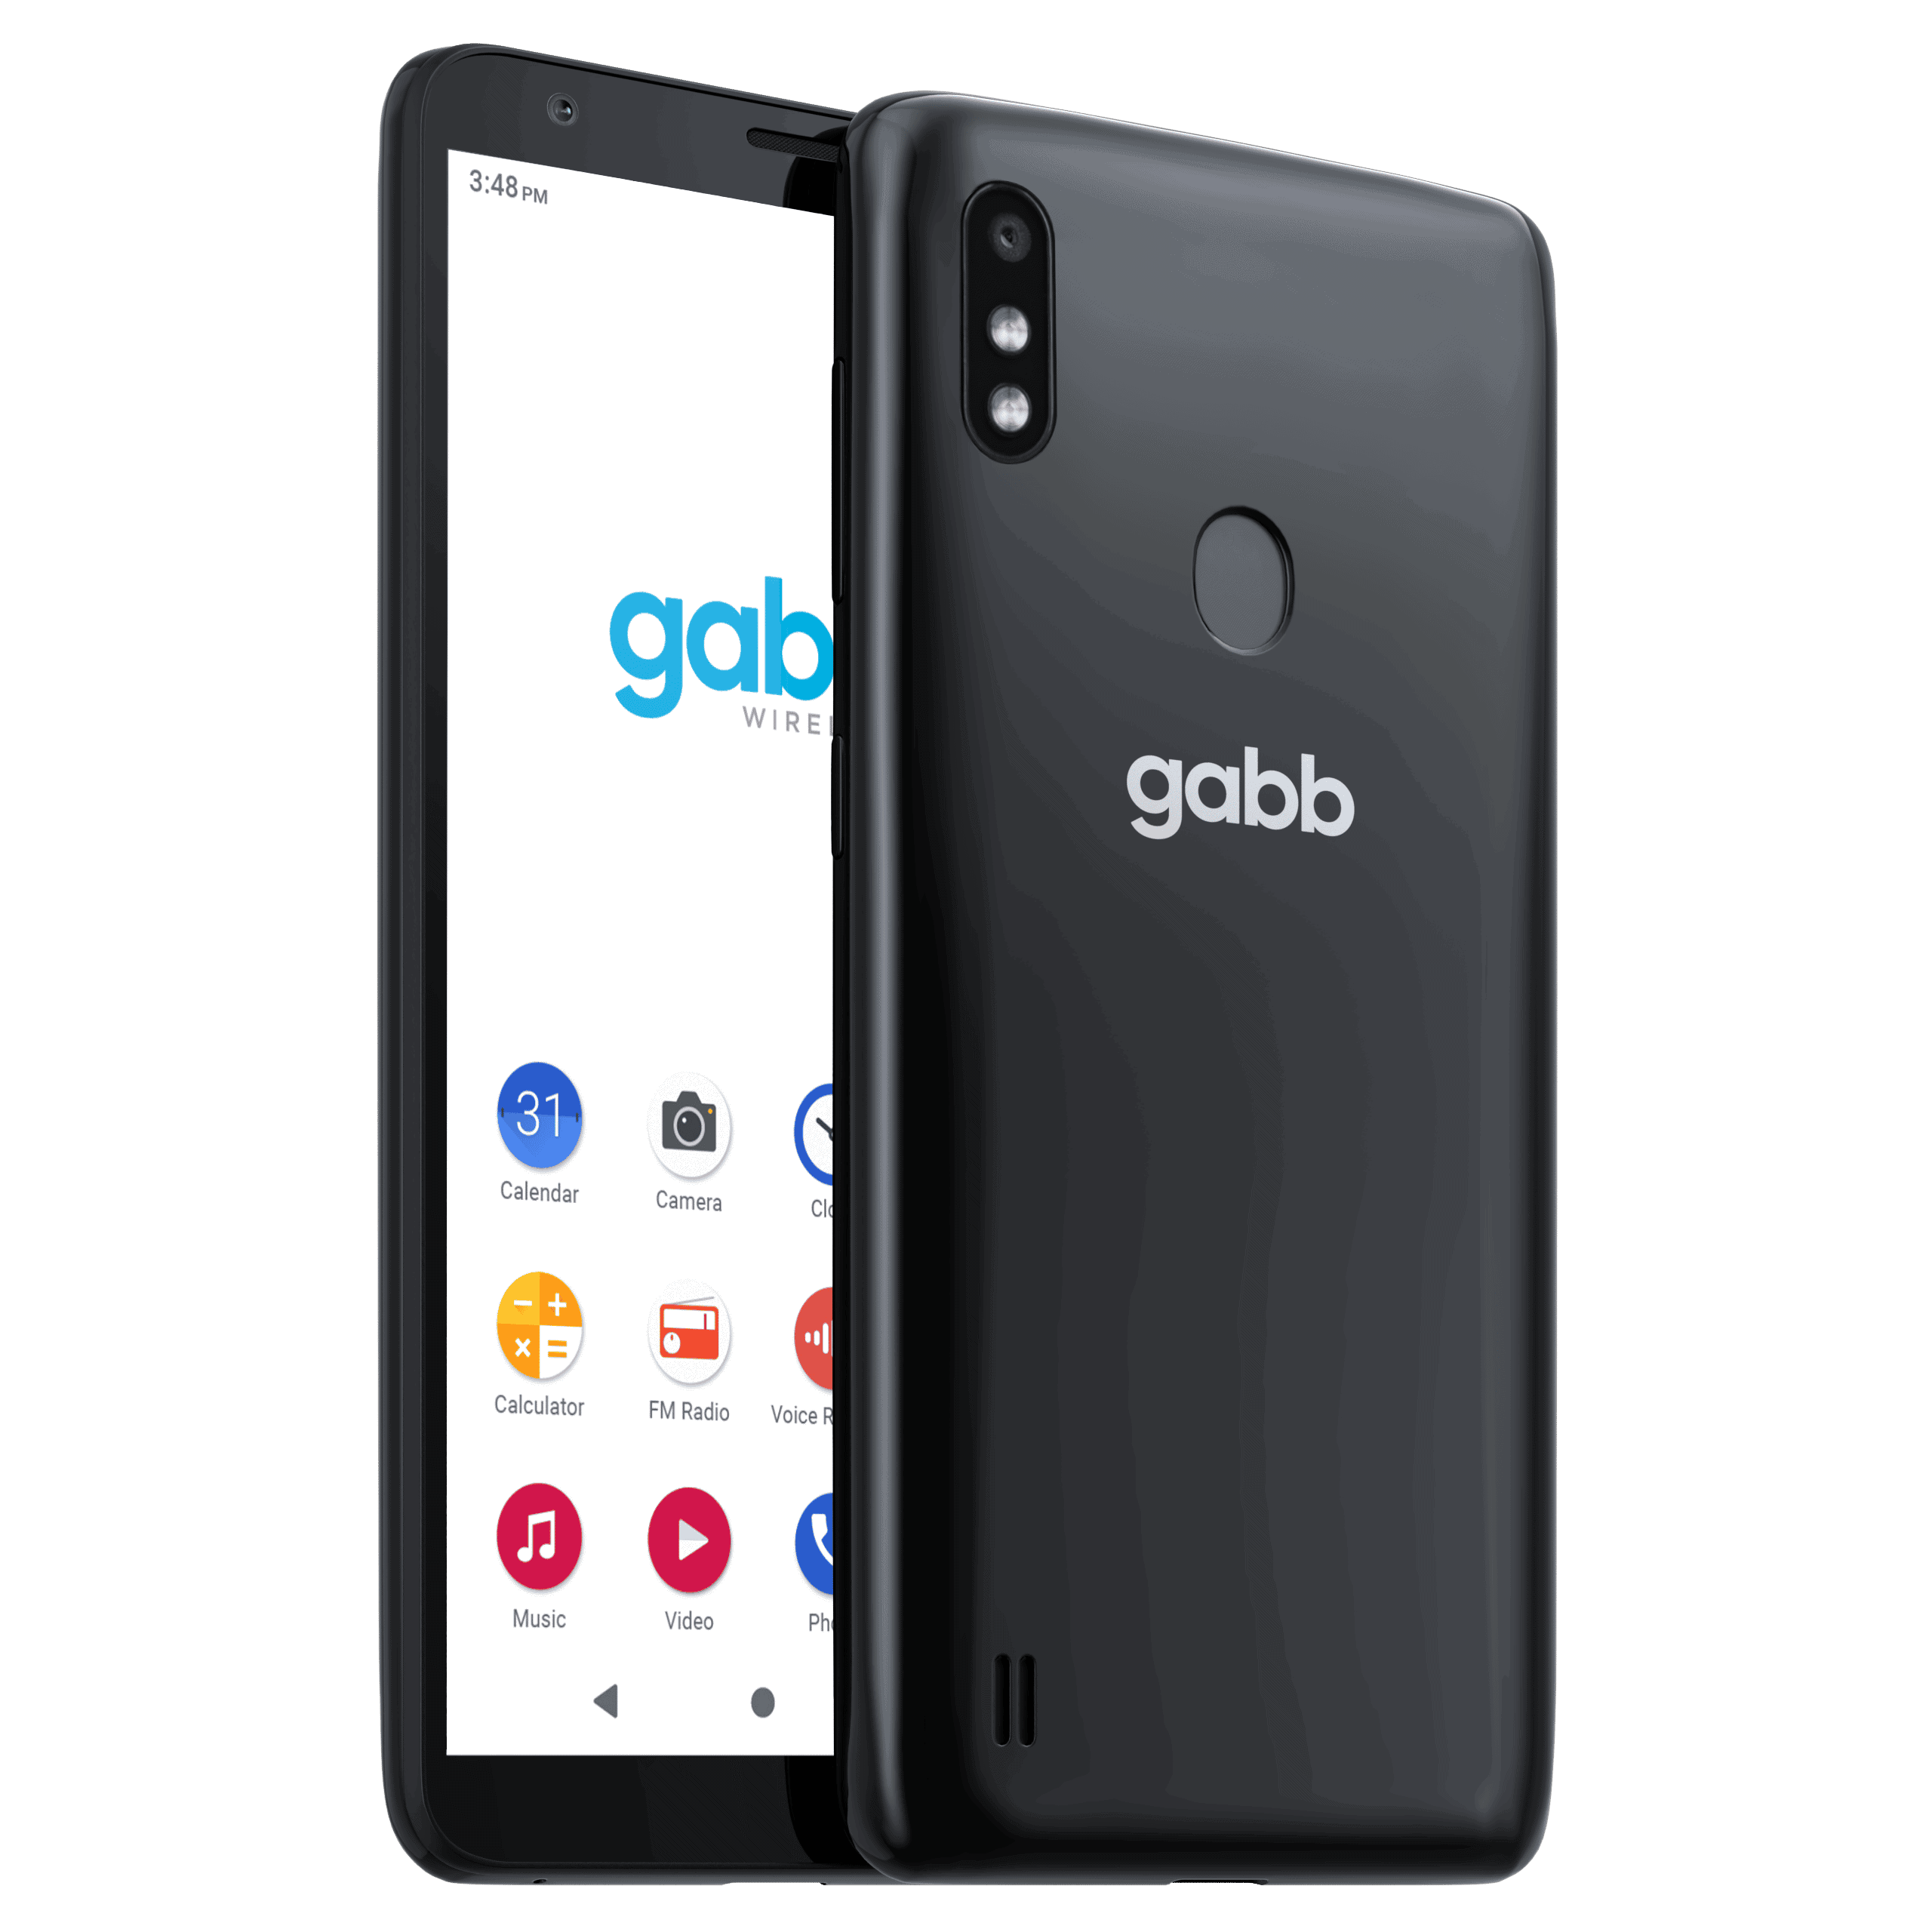 The Gabb Phone and Phone Plus are smartphones